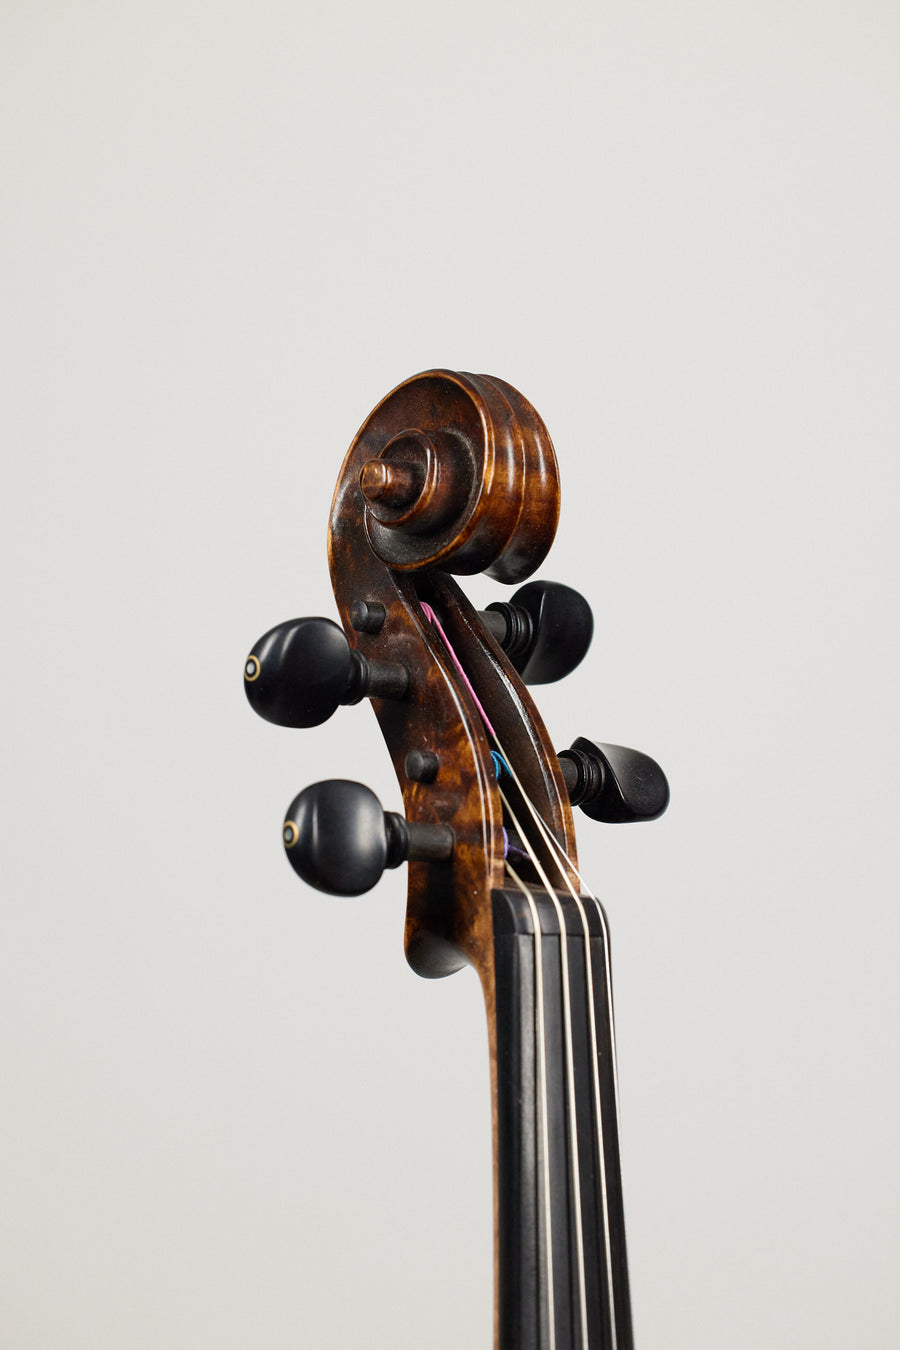 A Great American Viola By Anne Cole, 1992. 16 5/8.”